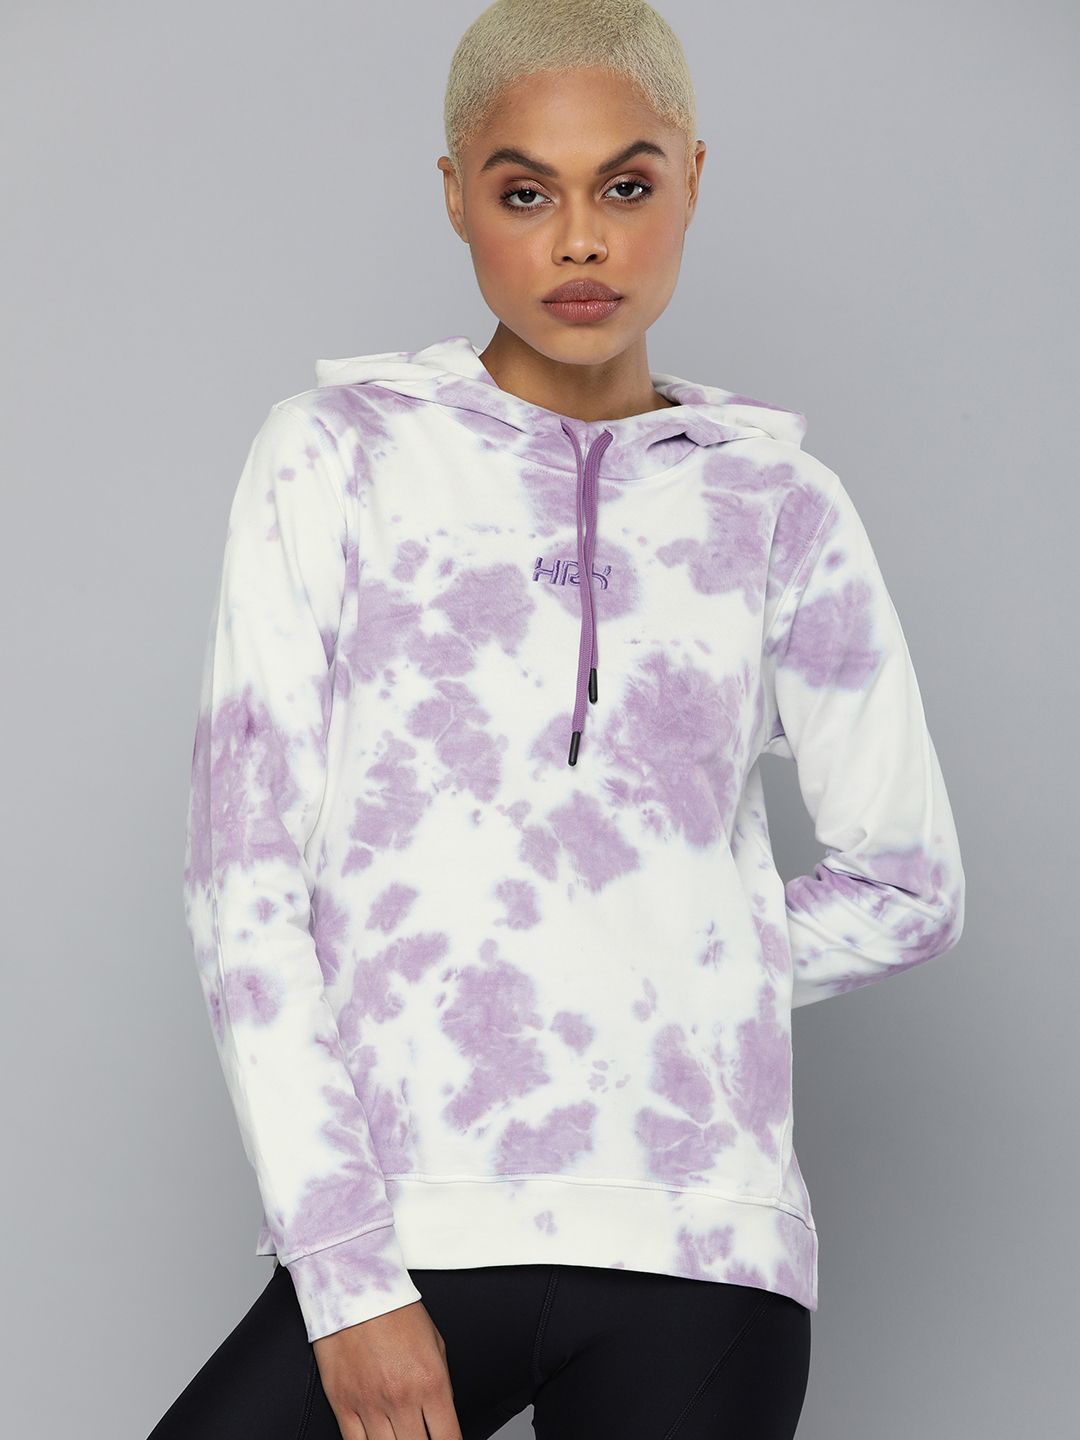 HRX by Hrithik Roshan Lifestyle Women Mauve & White Rapid-Dry Brand Carrier Sweatshirt Price in India